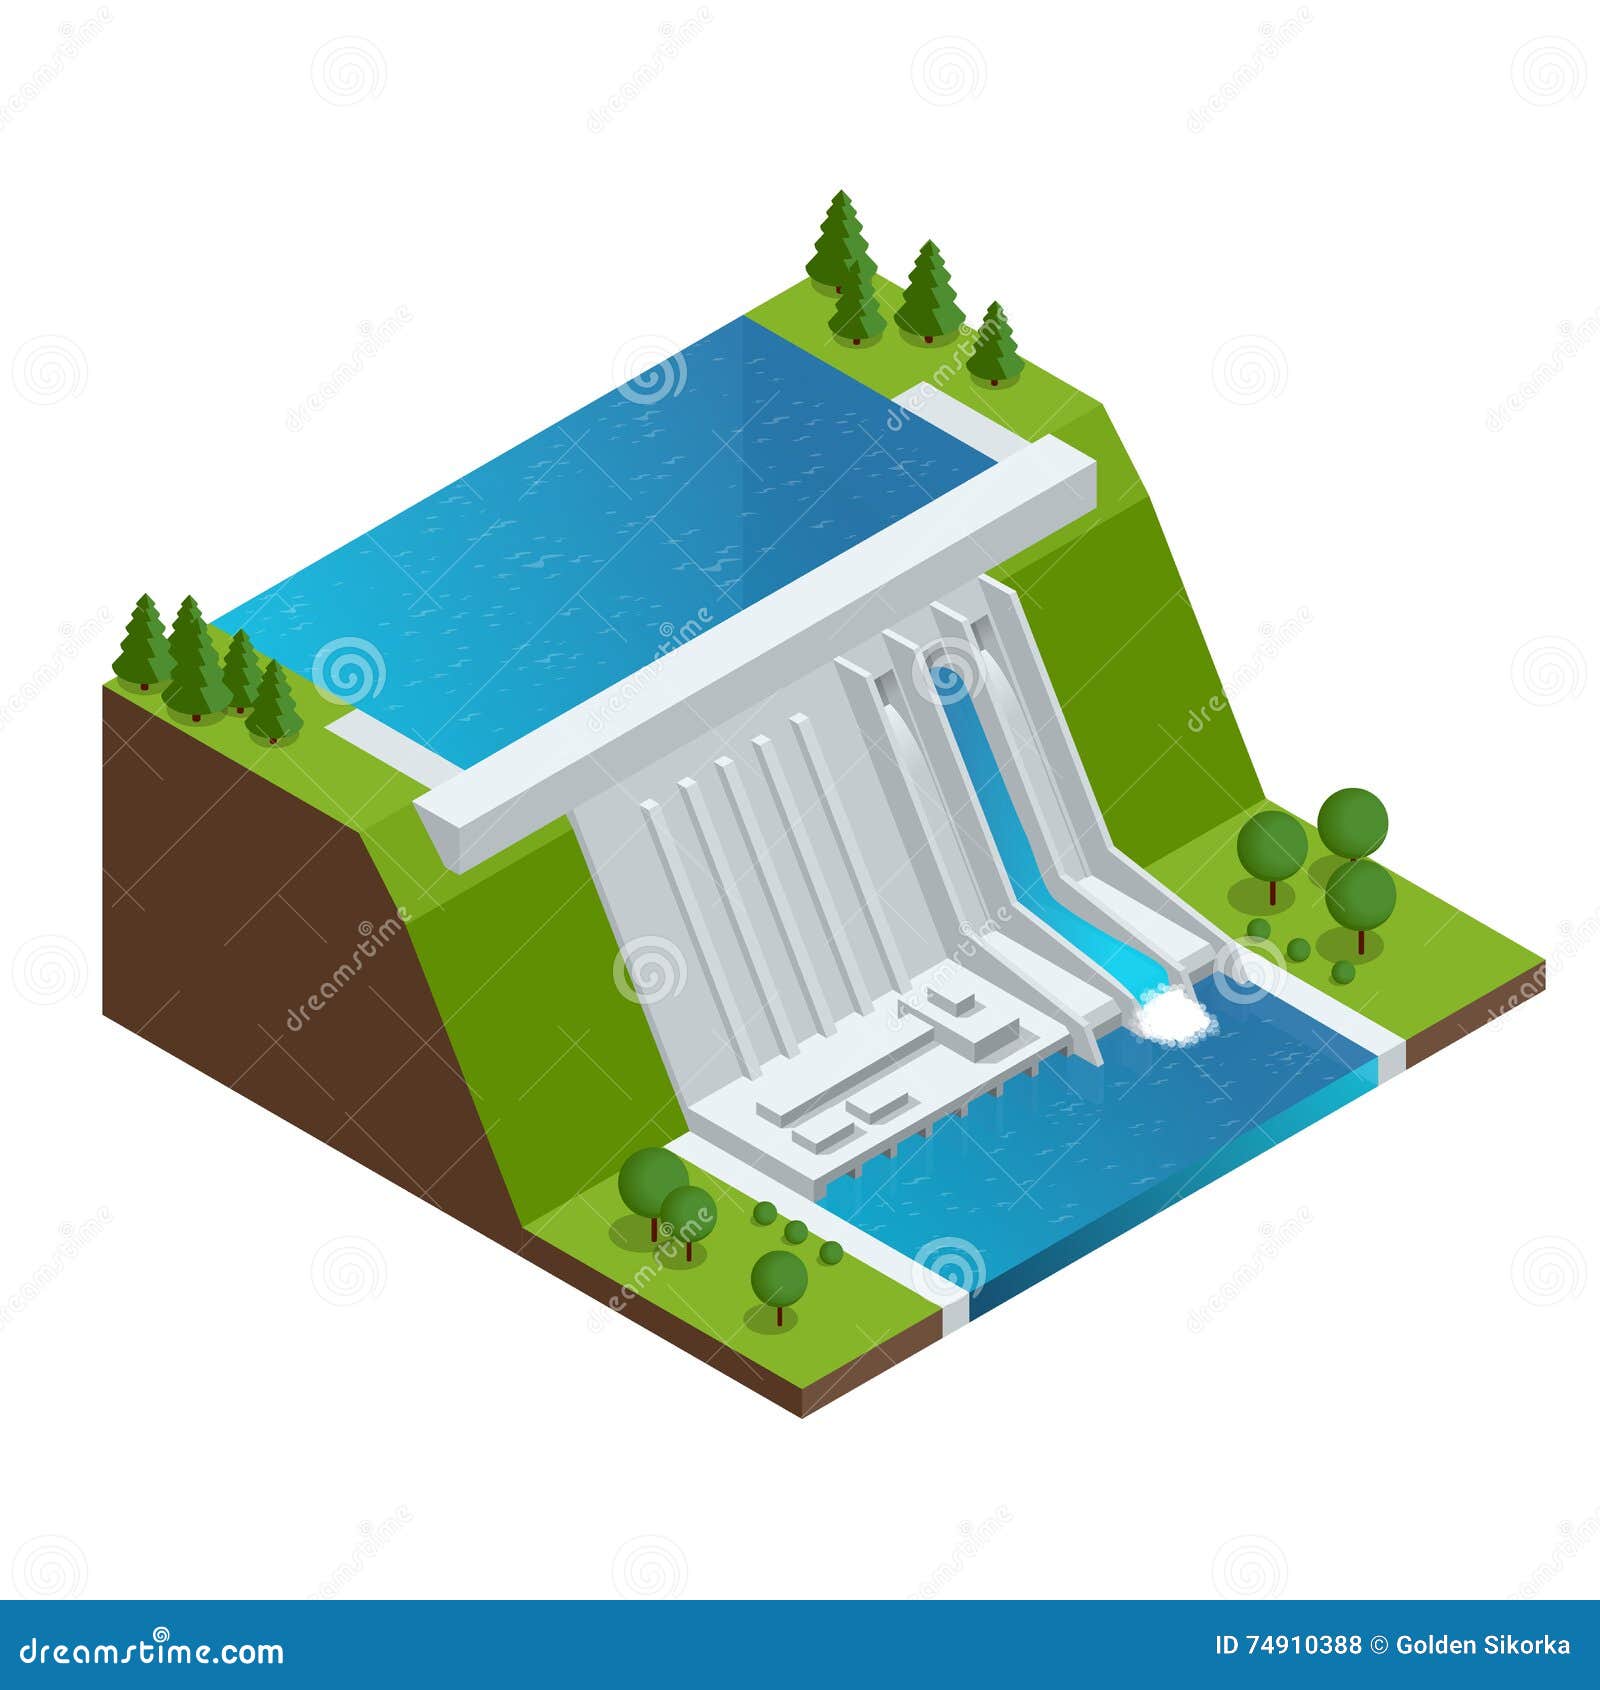 hydroelectric power plant. factory electric. water power station dam electricity grid energy supply chain. flat 3d